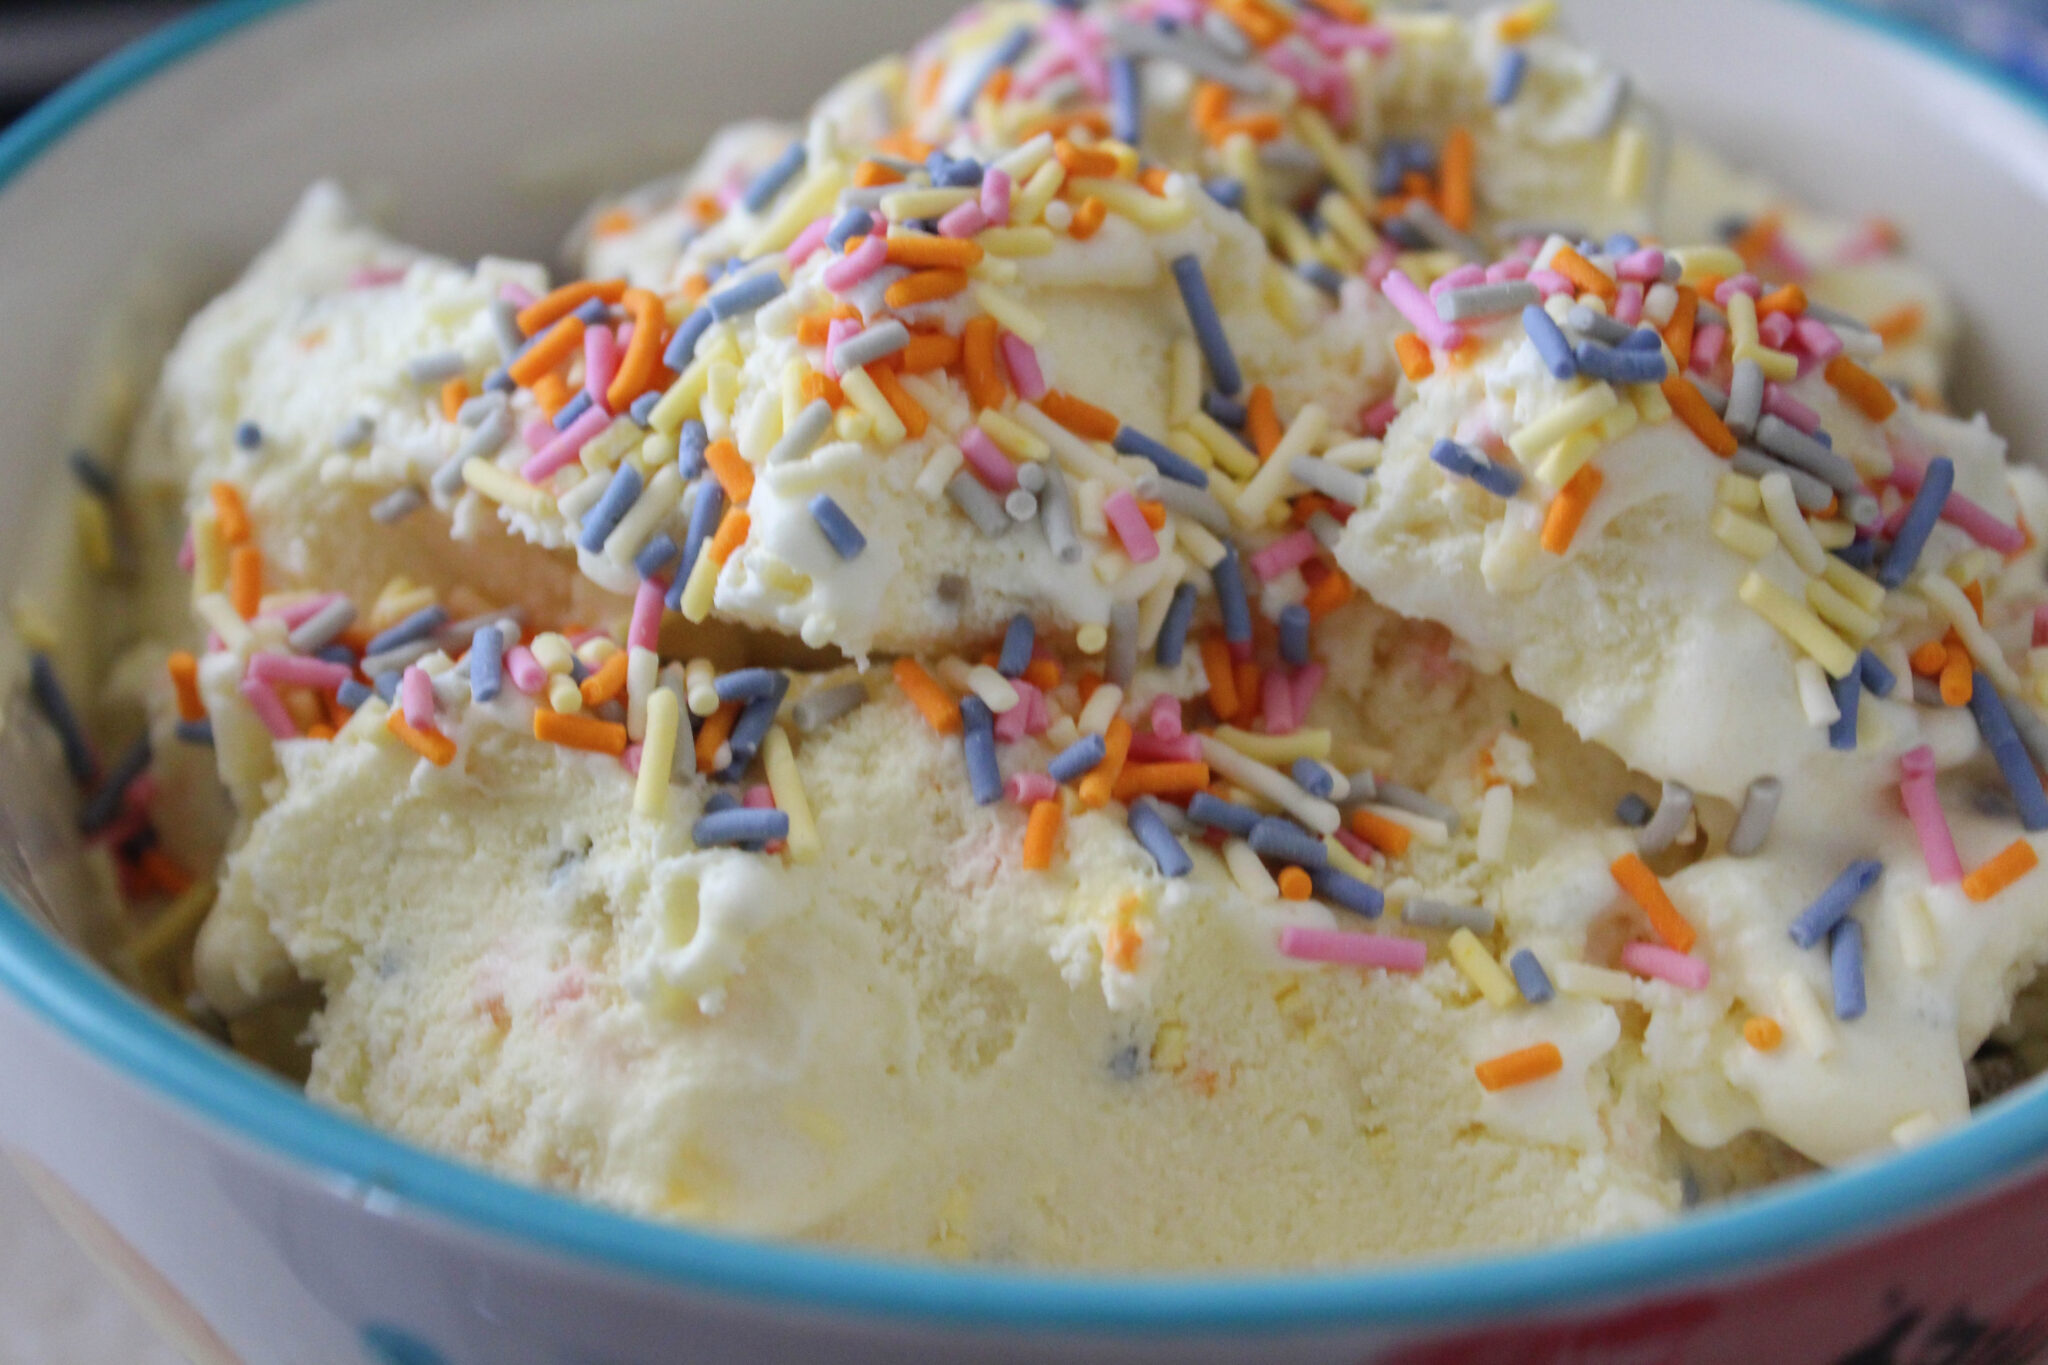 Craving ice cream cake? Try my Birthday Cake Ice Cream! It's creamy and so much fun. It's a Trim Healthy Mama S, Keto, and Sugar-Free,